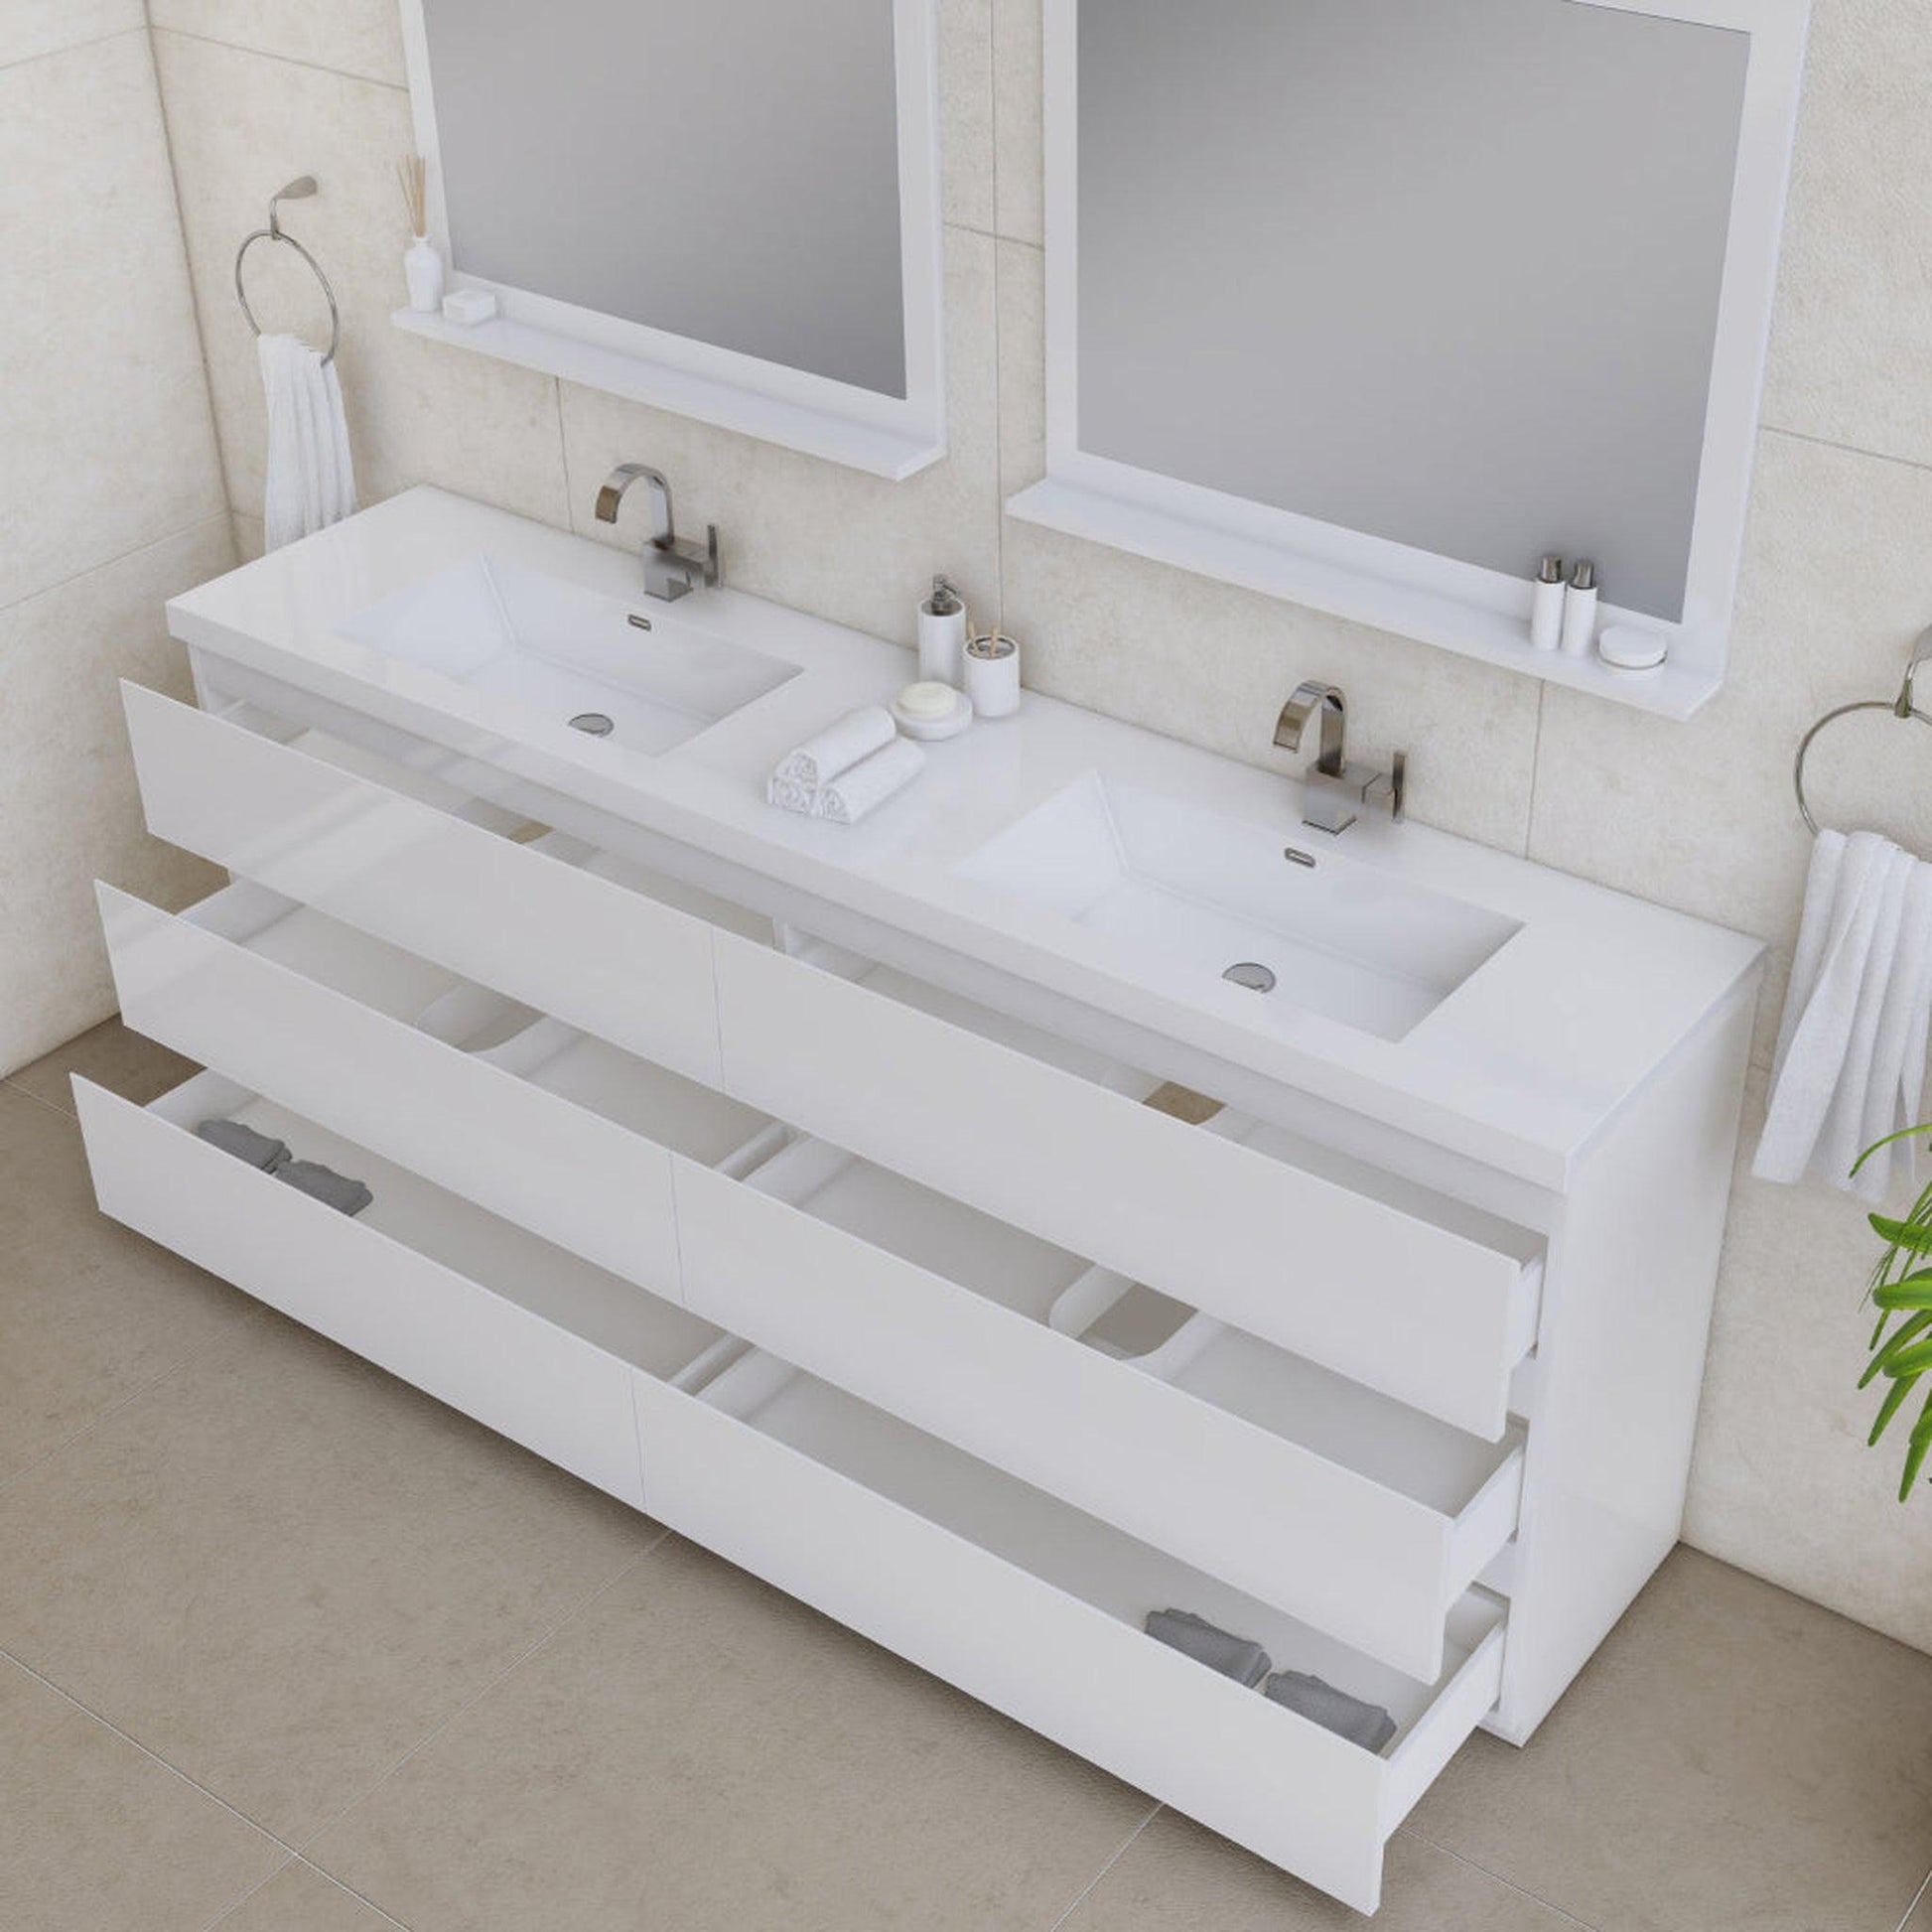 Alya Bath Paterno 84" Double White Modern Freestanding Bathroom Vanity With Acrylic Top and Integrated Sink